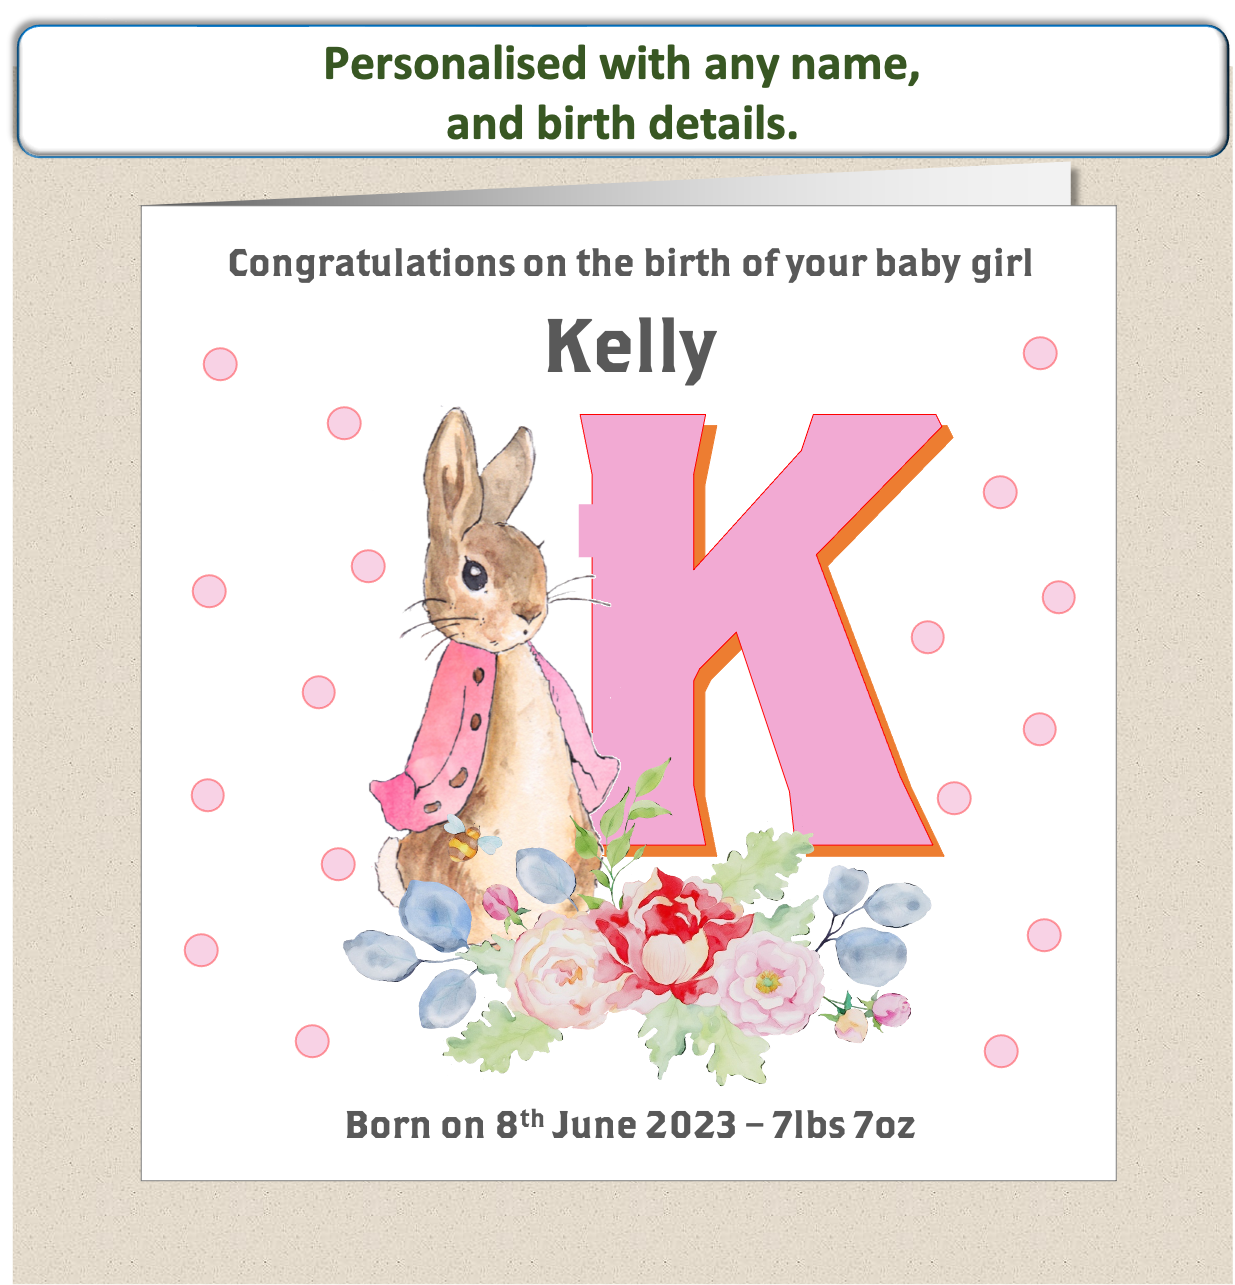 Personalised New Baby Arrival Congratulations Card - Peter Rabbit Pink